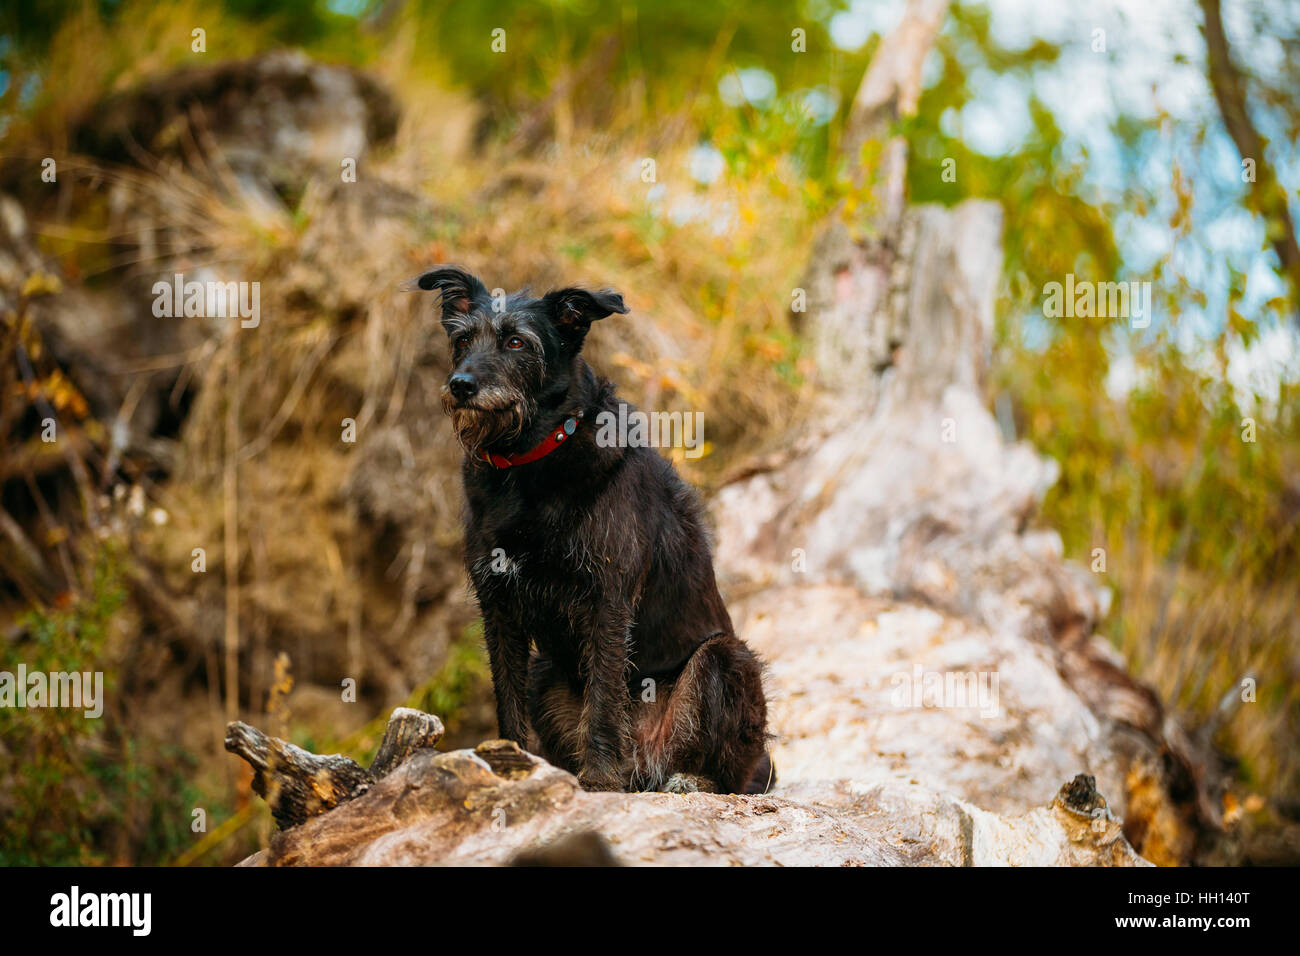 Small Size Black Mixed Breed Dog Sitting On Trunk Of Fallen Tree Stock Photo